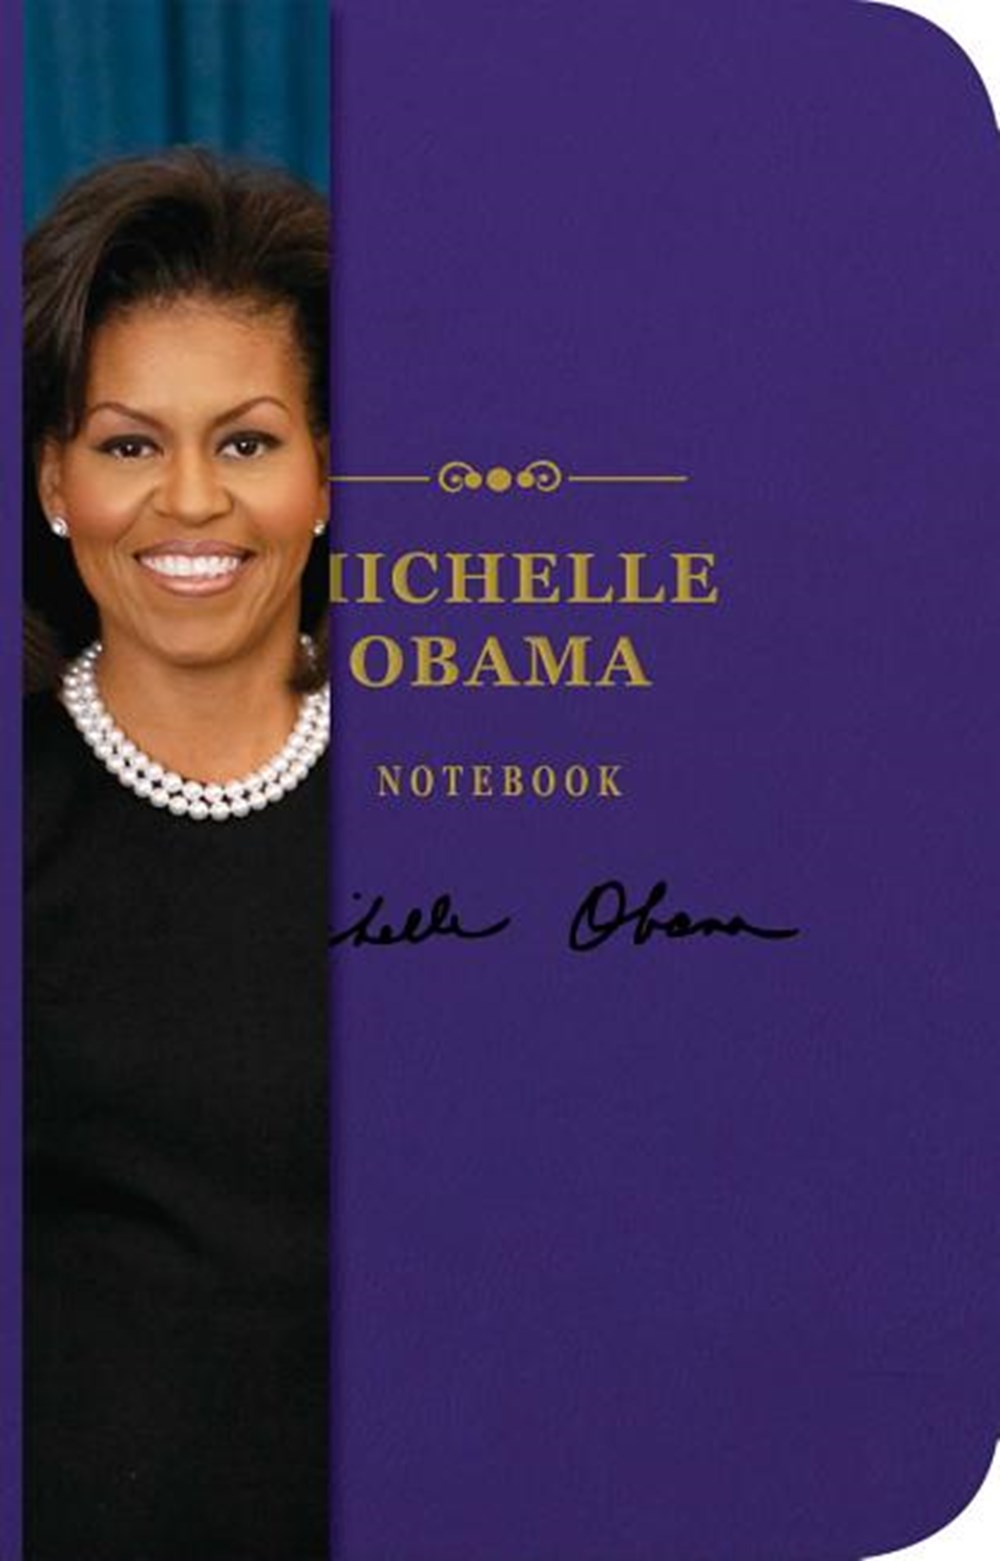 Michelle Obama Notebook Signature Edition: An Inspiring Notebook for Curious Minds